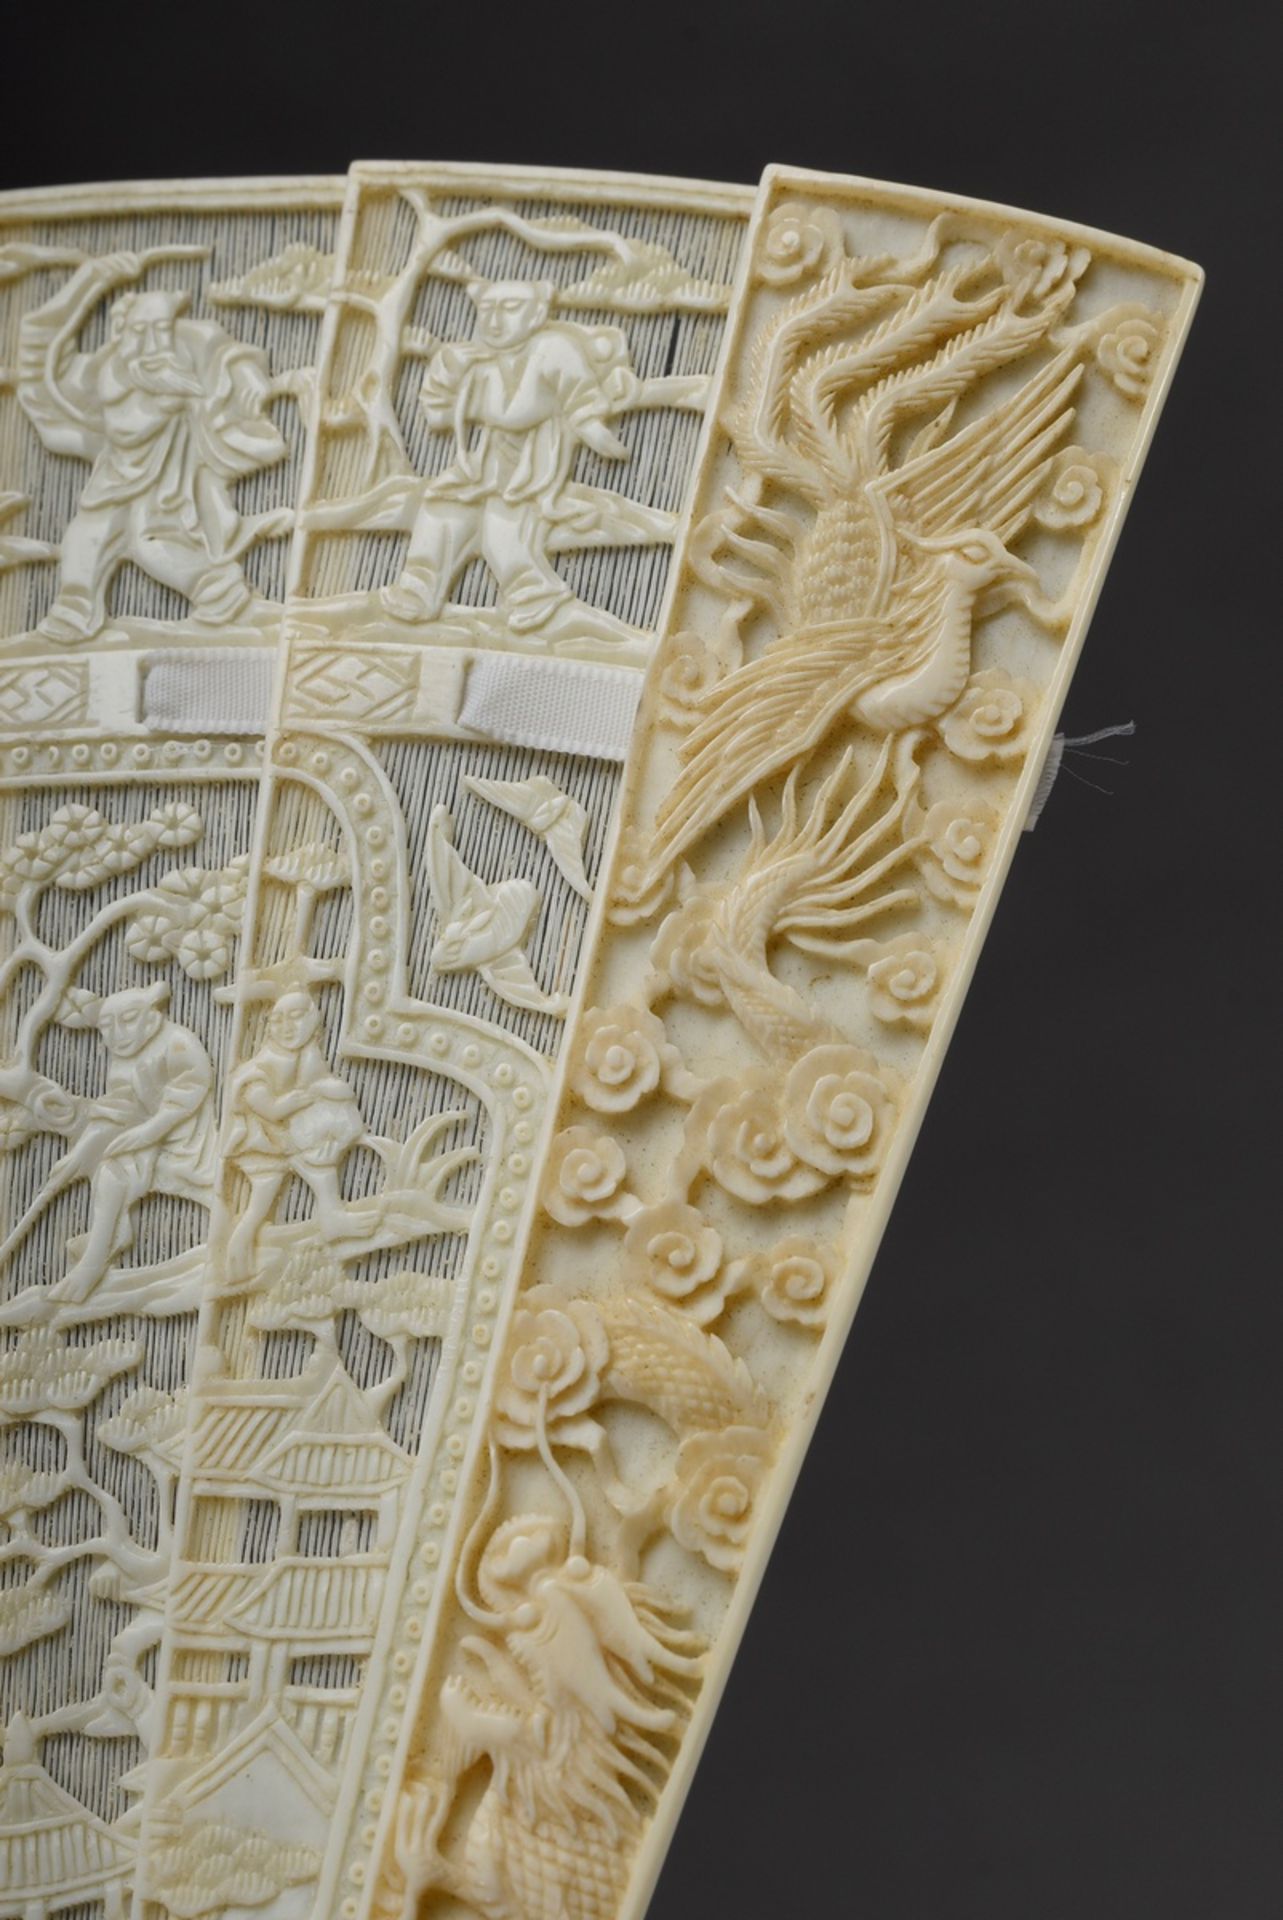 Ivory brisée fan with finest carvings "Chinese genre scenes" and central monogram "MB", Canton end  - Image 5 of 8